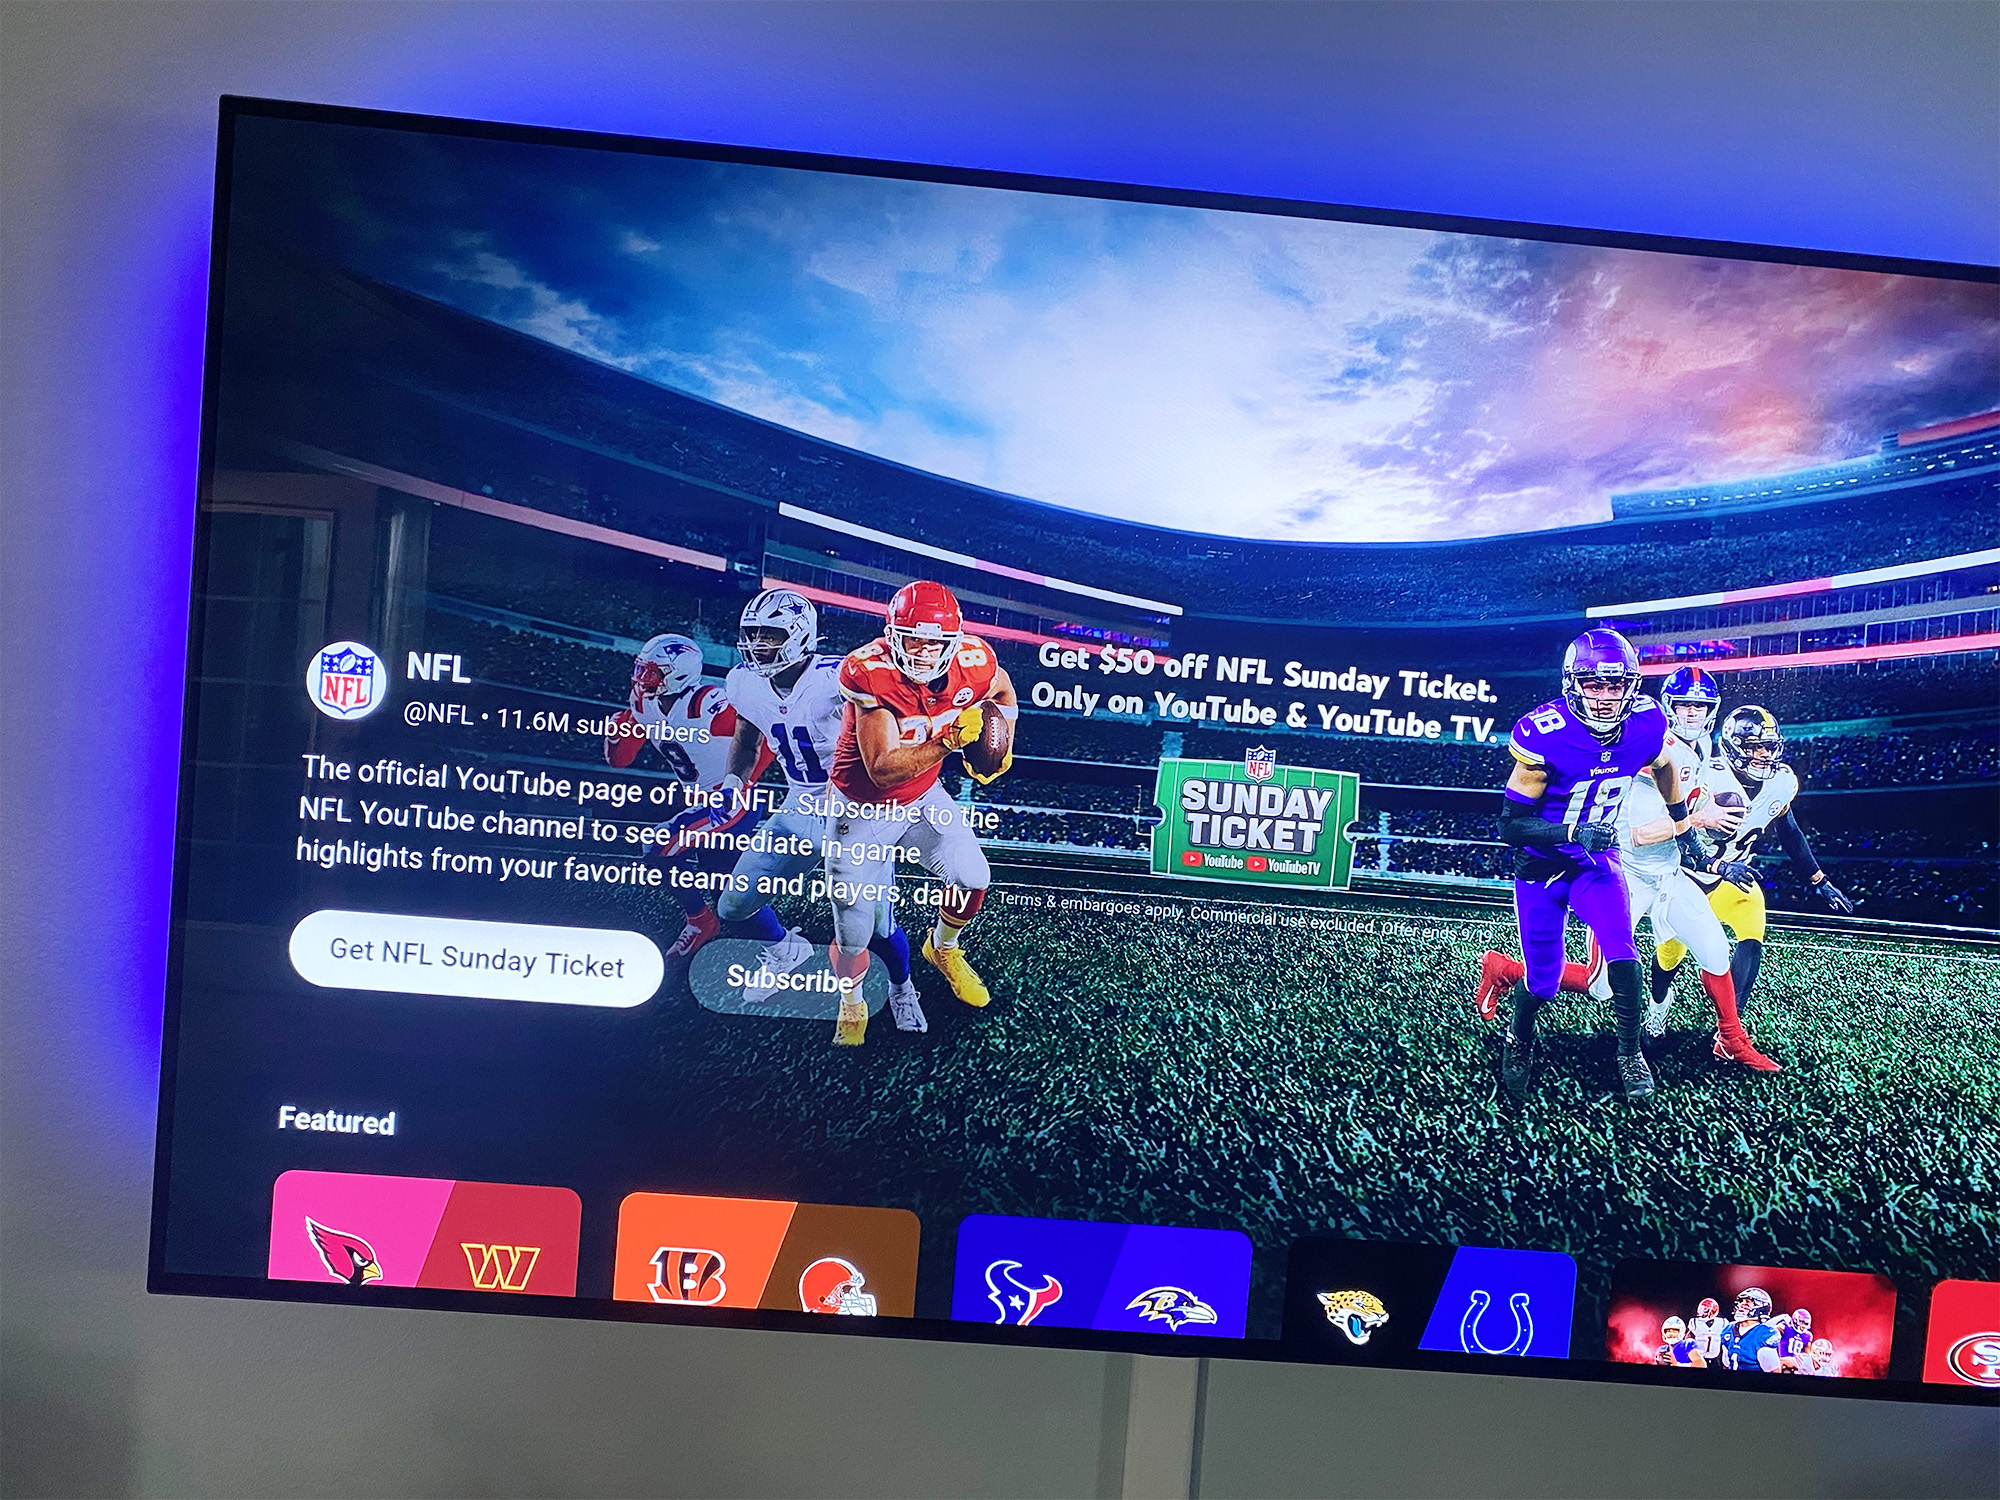 NFL Sunday Ticket TV expands its game